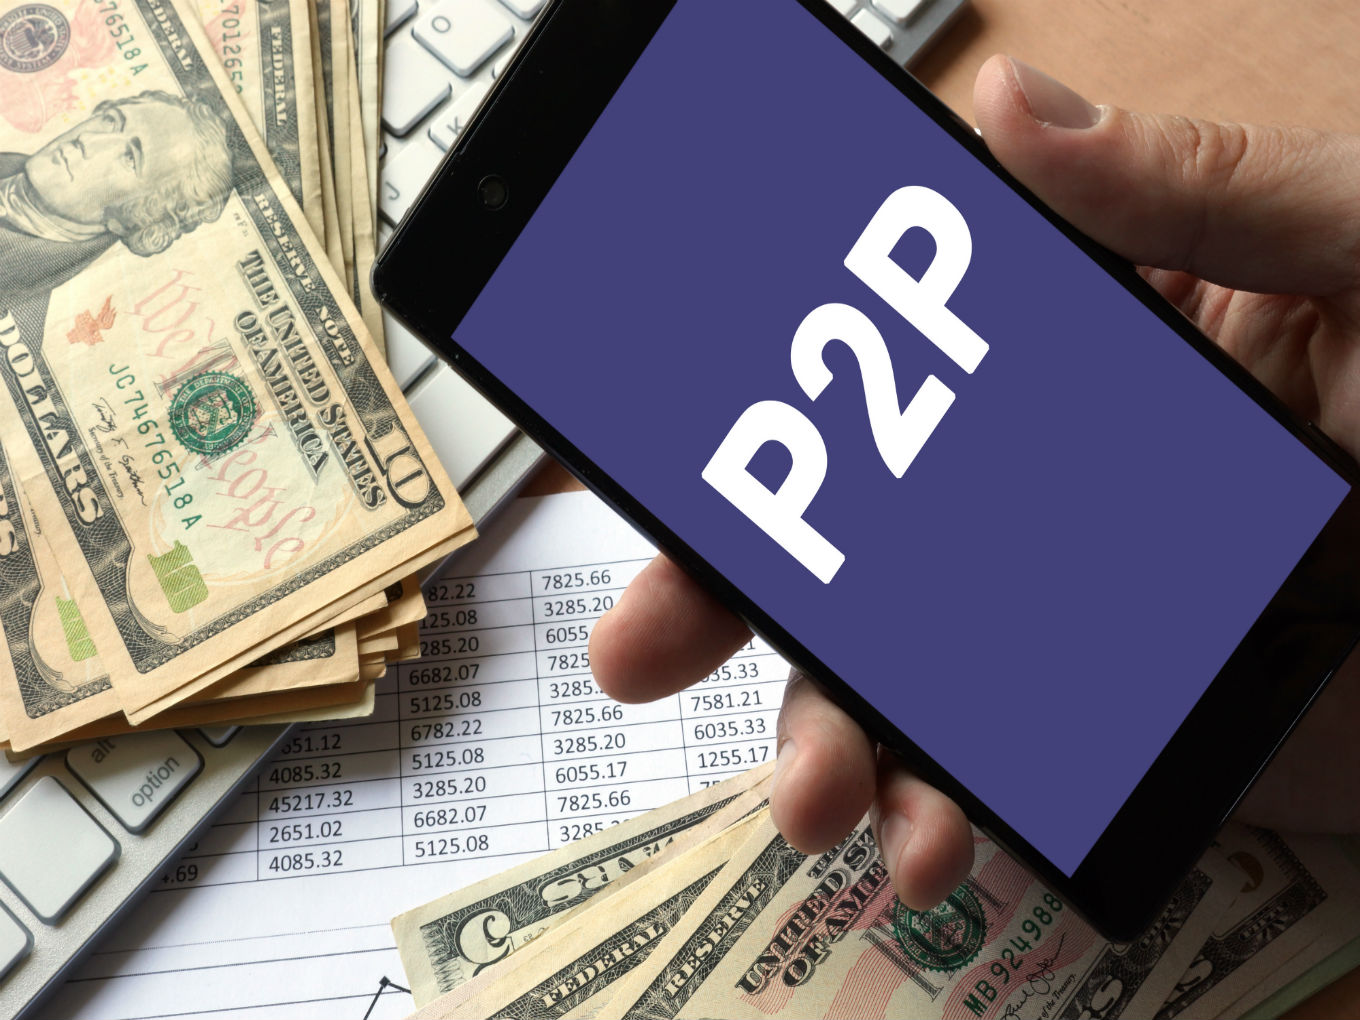 P2P lending and India’s credit woes: How the RBI has simplified access to finance for the country’s masses through the recognition of the P2P lending model